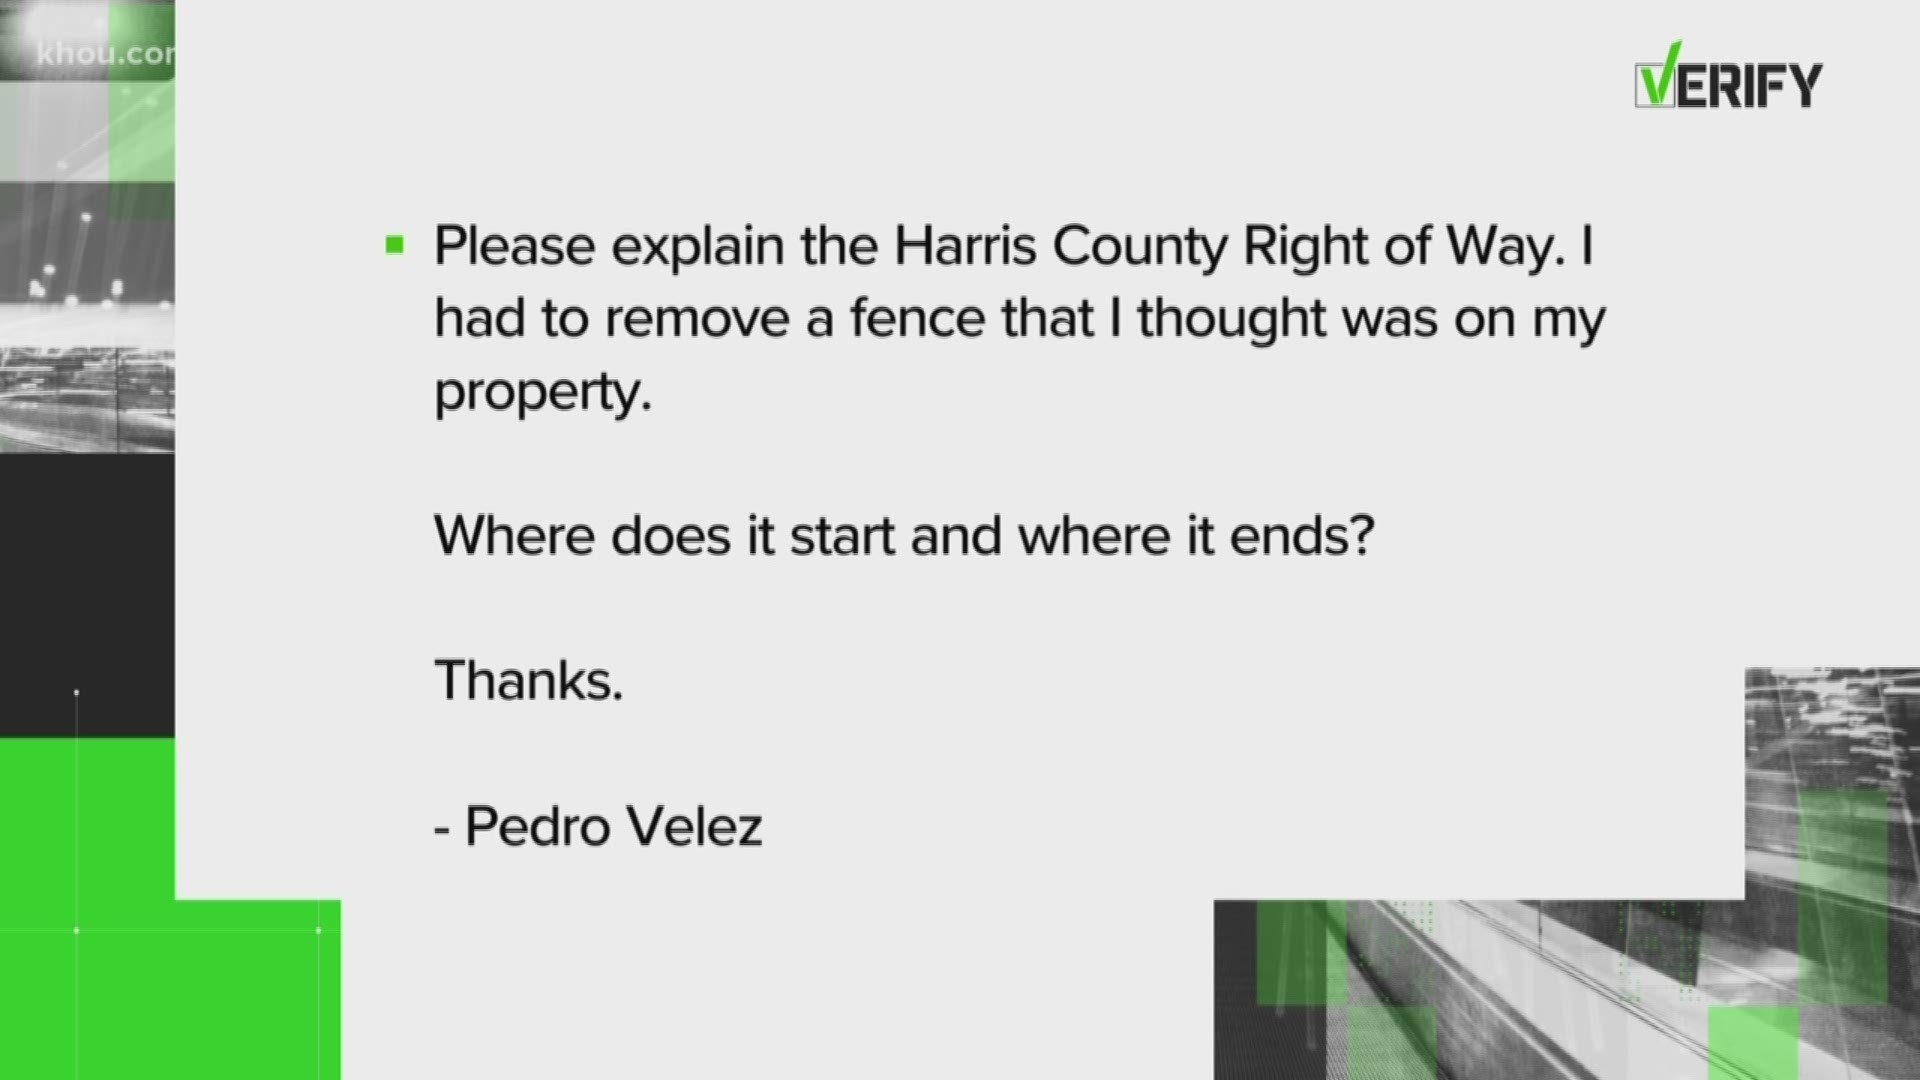 Are you familiar with Harris County's right of way rules? If not, you should be. A KHOU 11 viewer asked us for some clarification, so we verified.